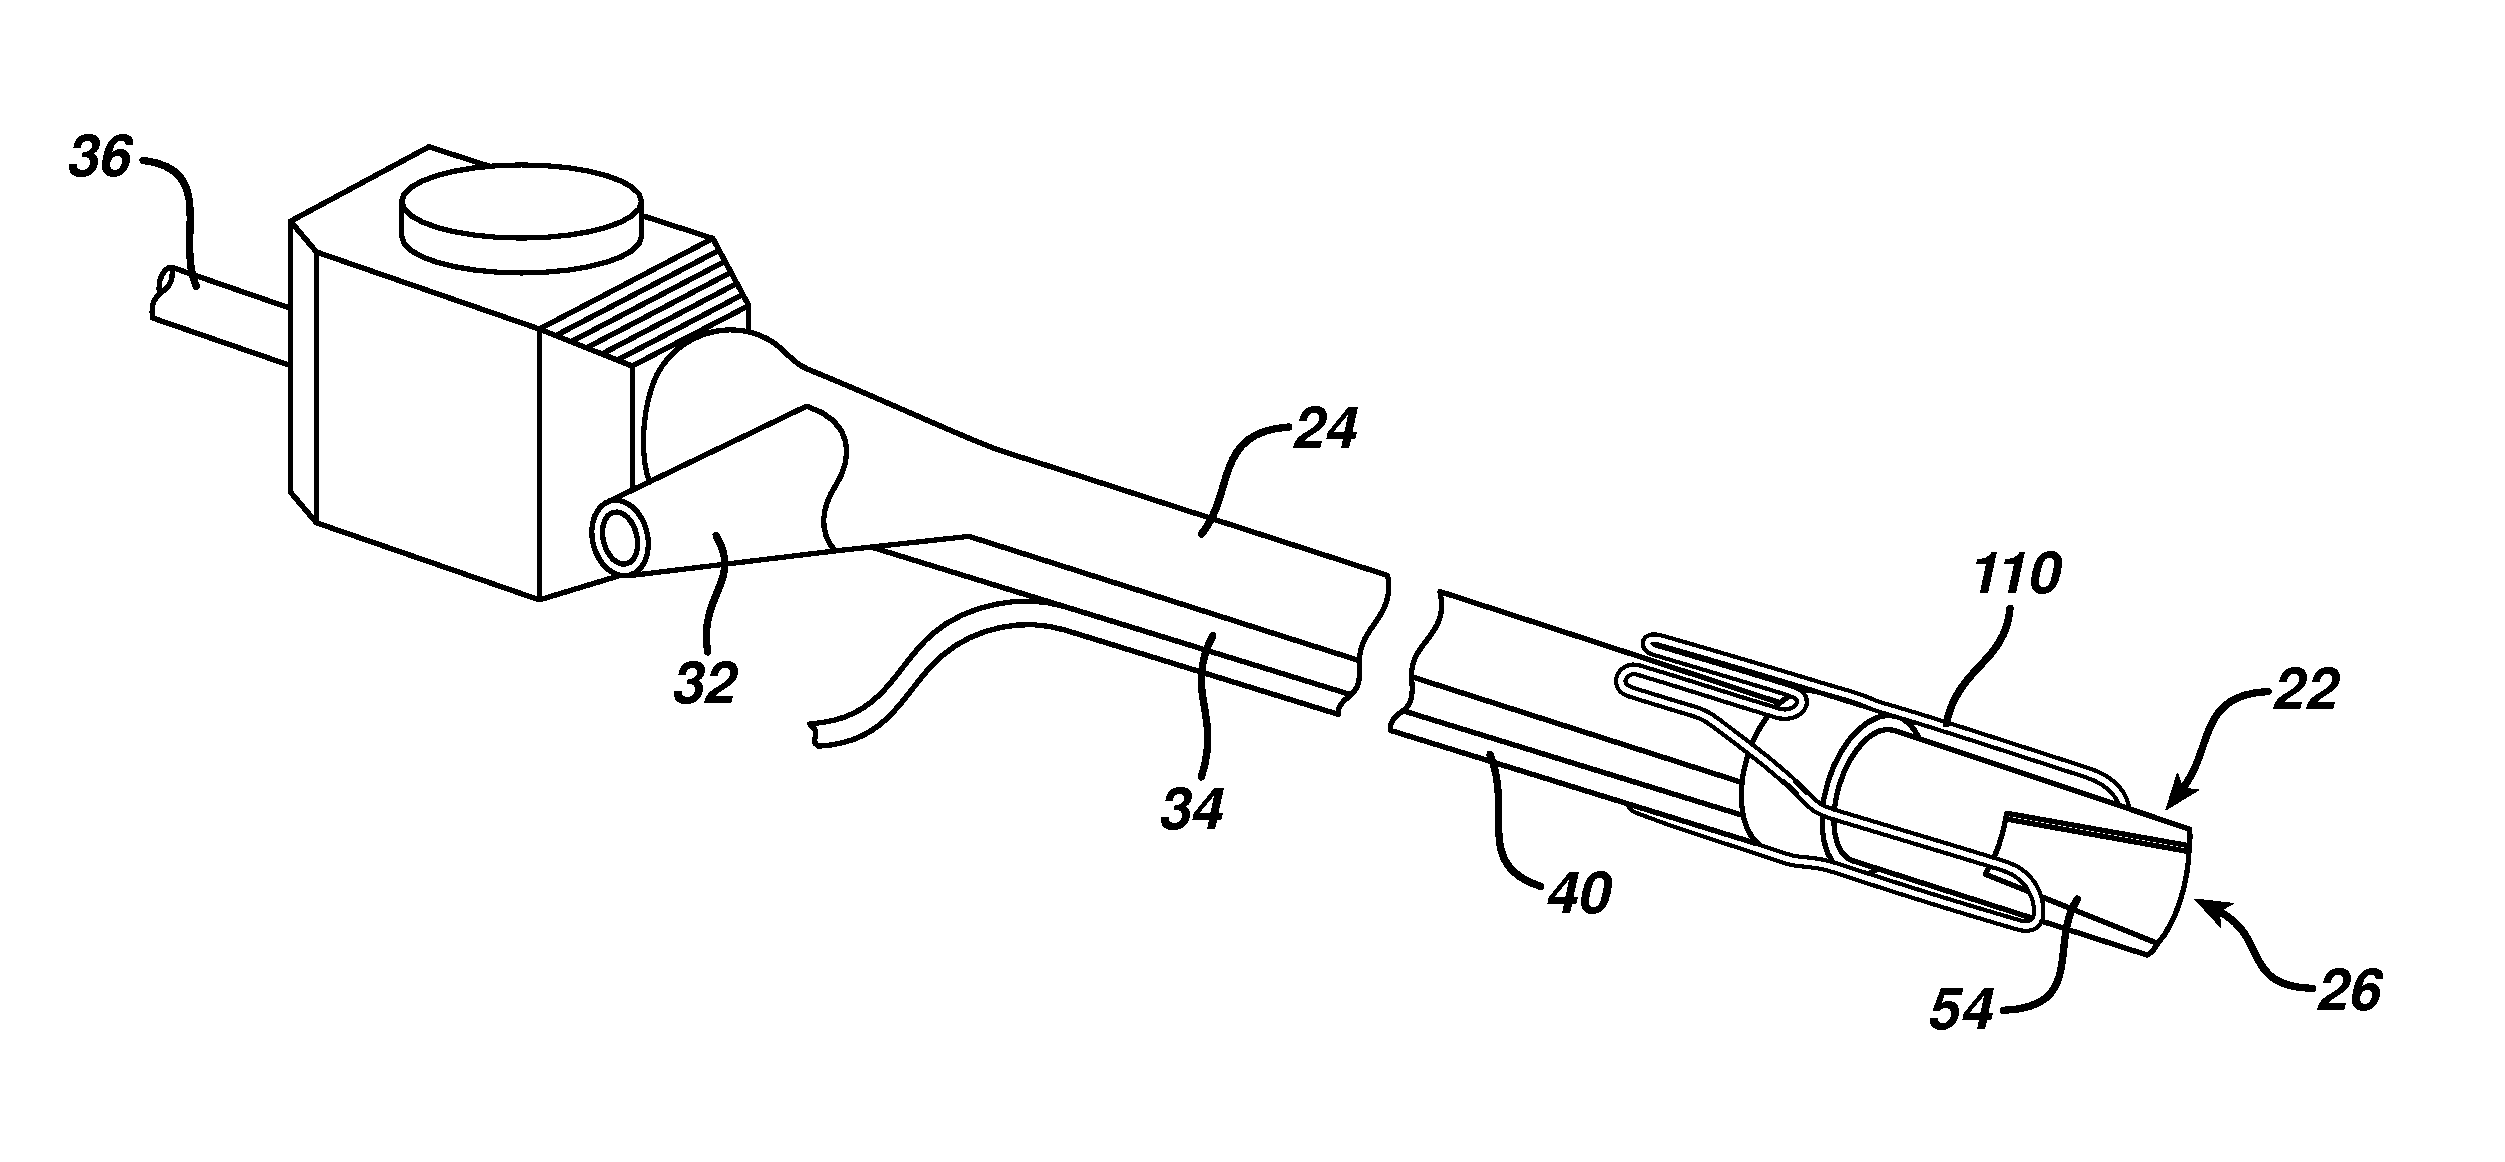 Device for plicating and fastening gastric tissue